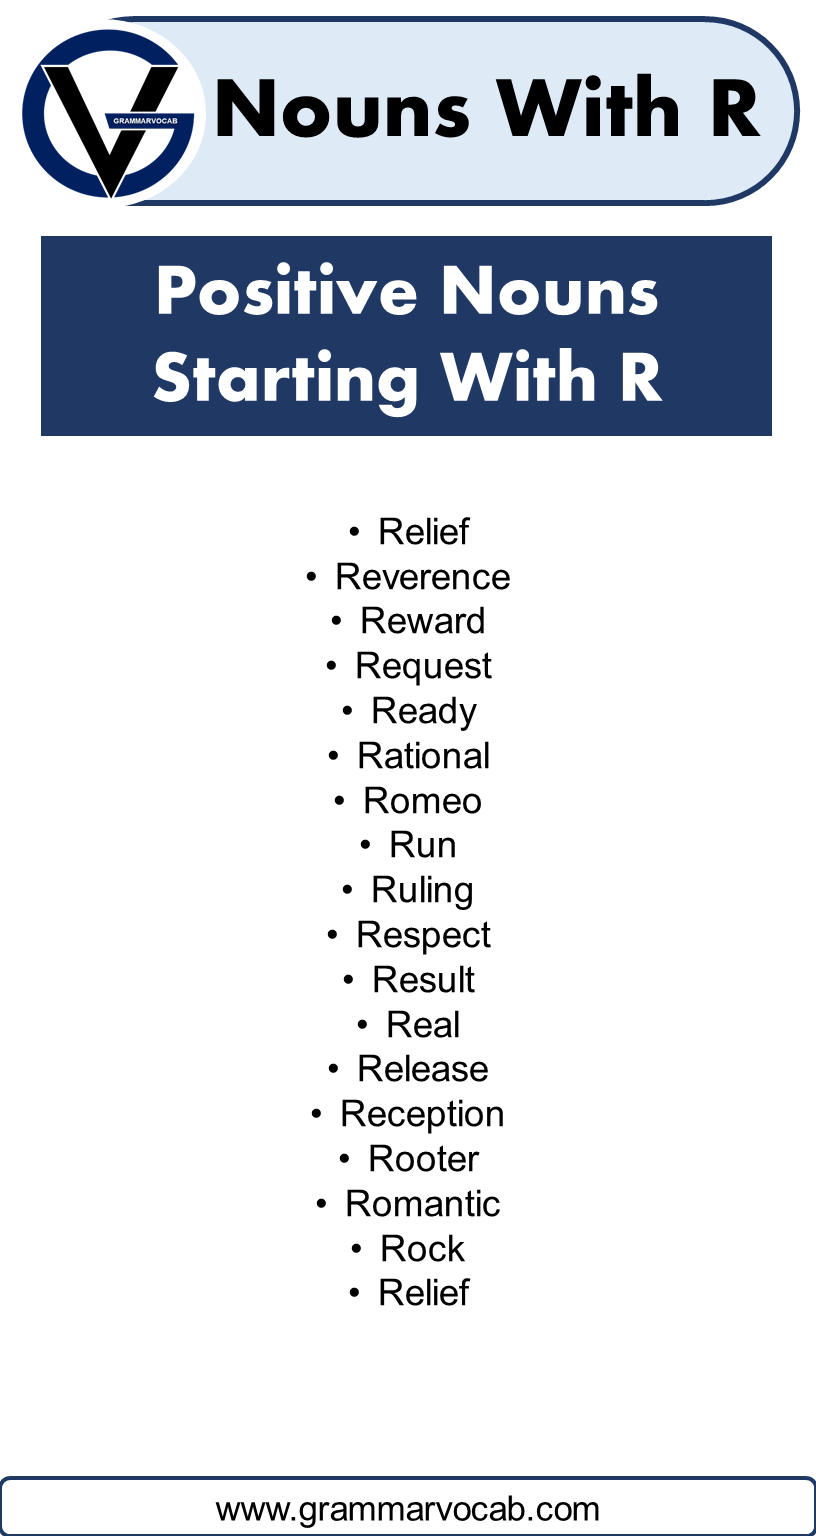 Positive Nouns That Start With R